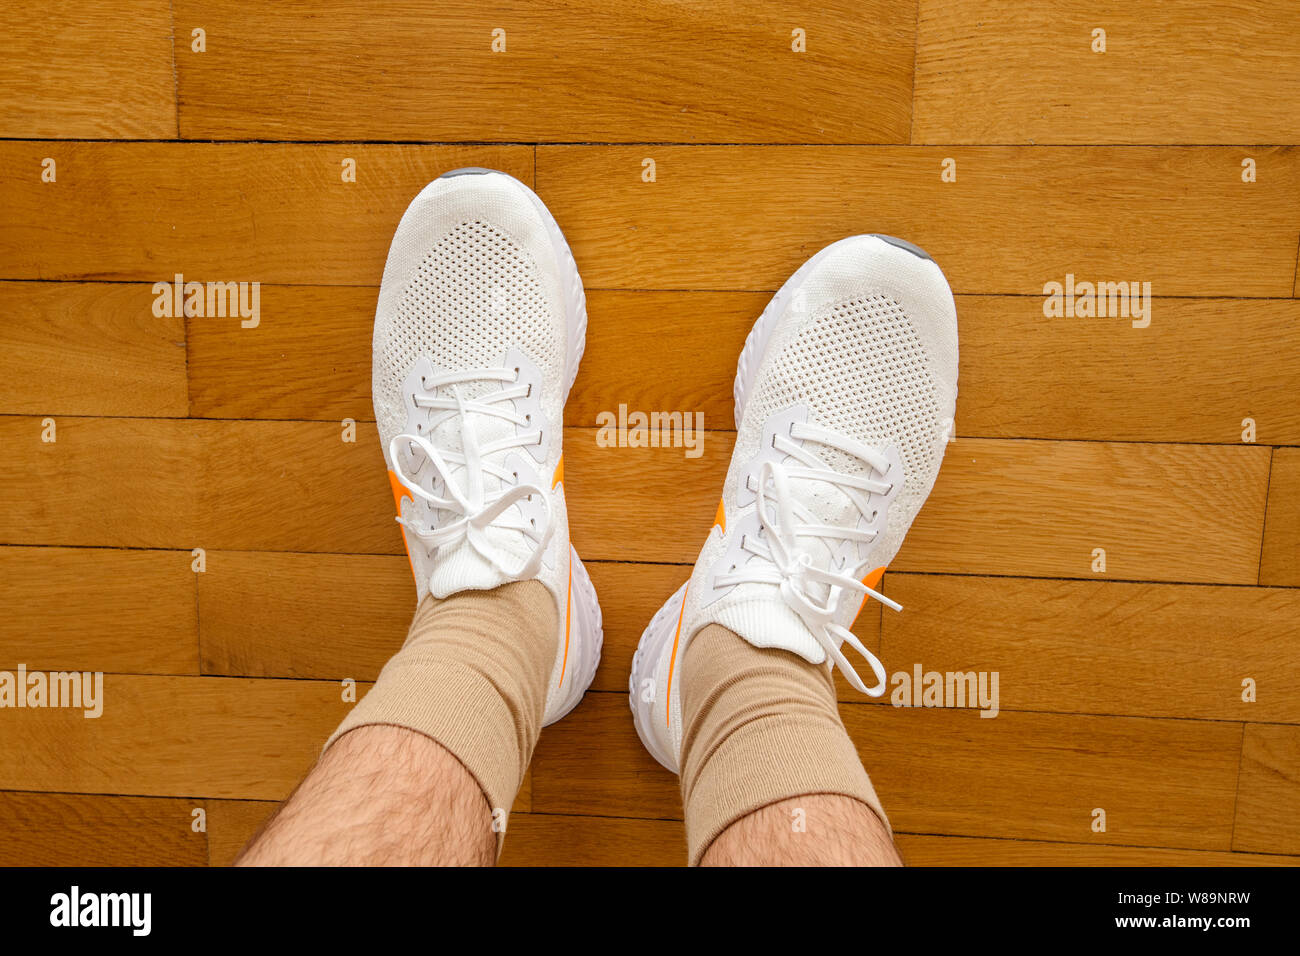 Paris France - Jul 13 2019: Man wearing measuring new Nike Epic React  Flyknit 2 running shoes equipment on the living room wooden floor  manufactured by Nike sportswear Stock Photo - Alamy